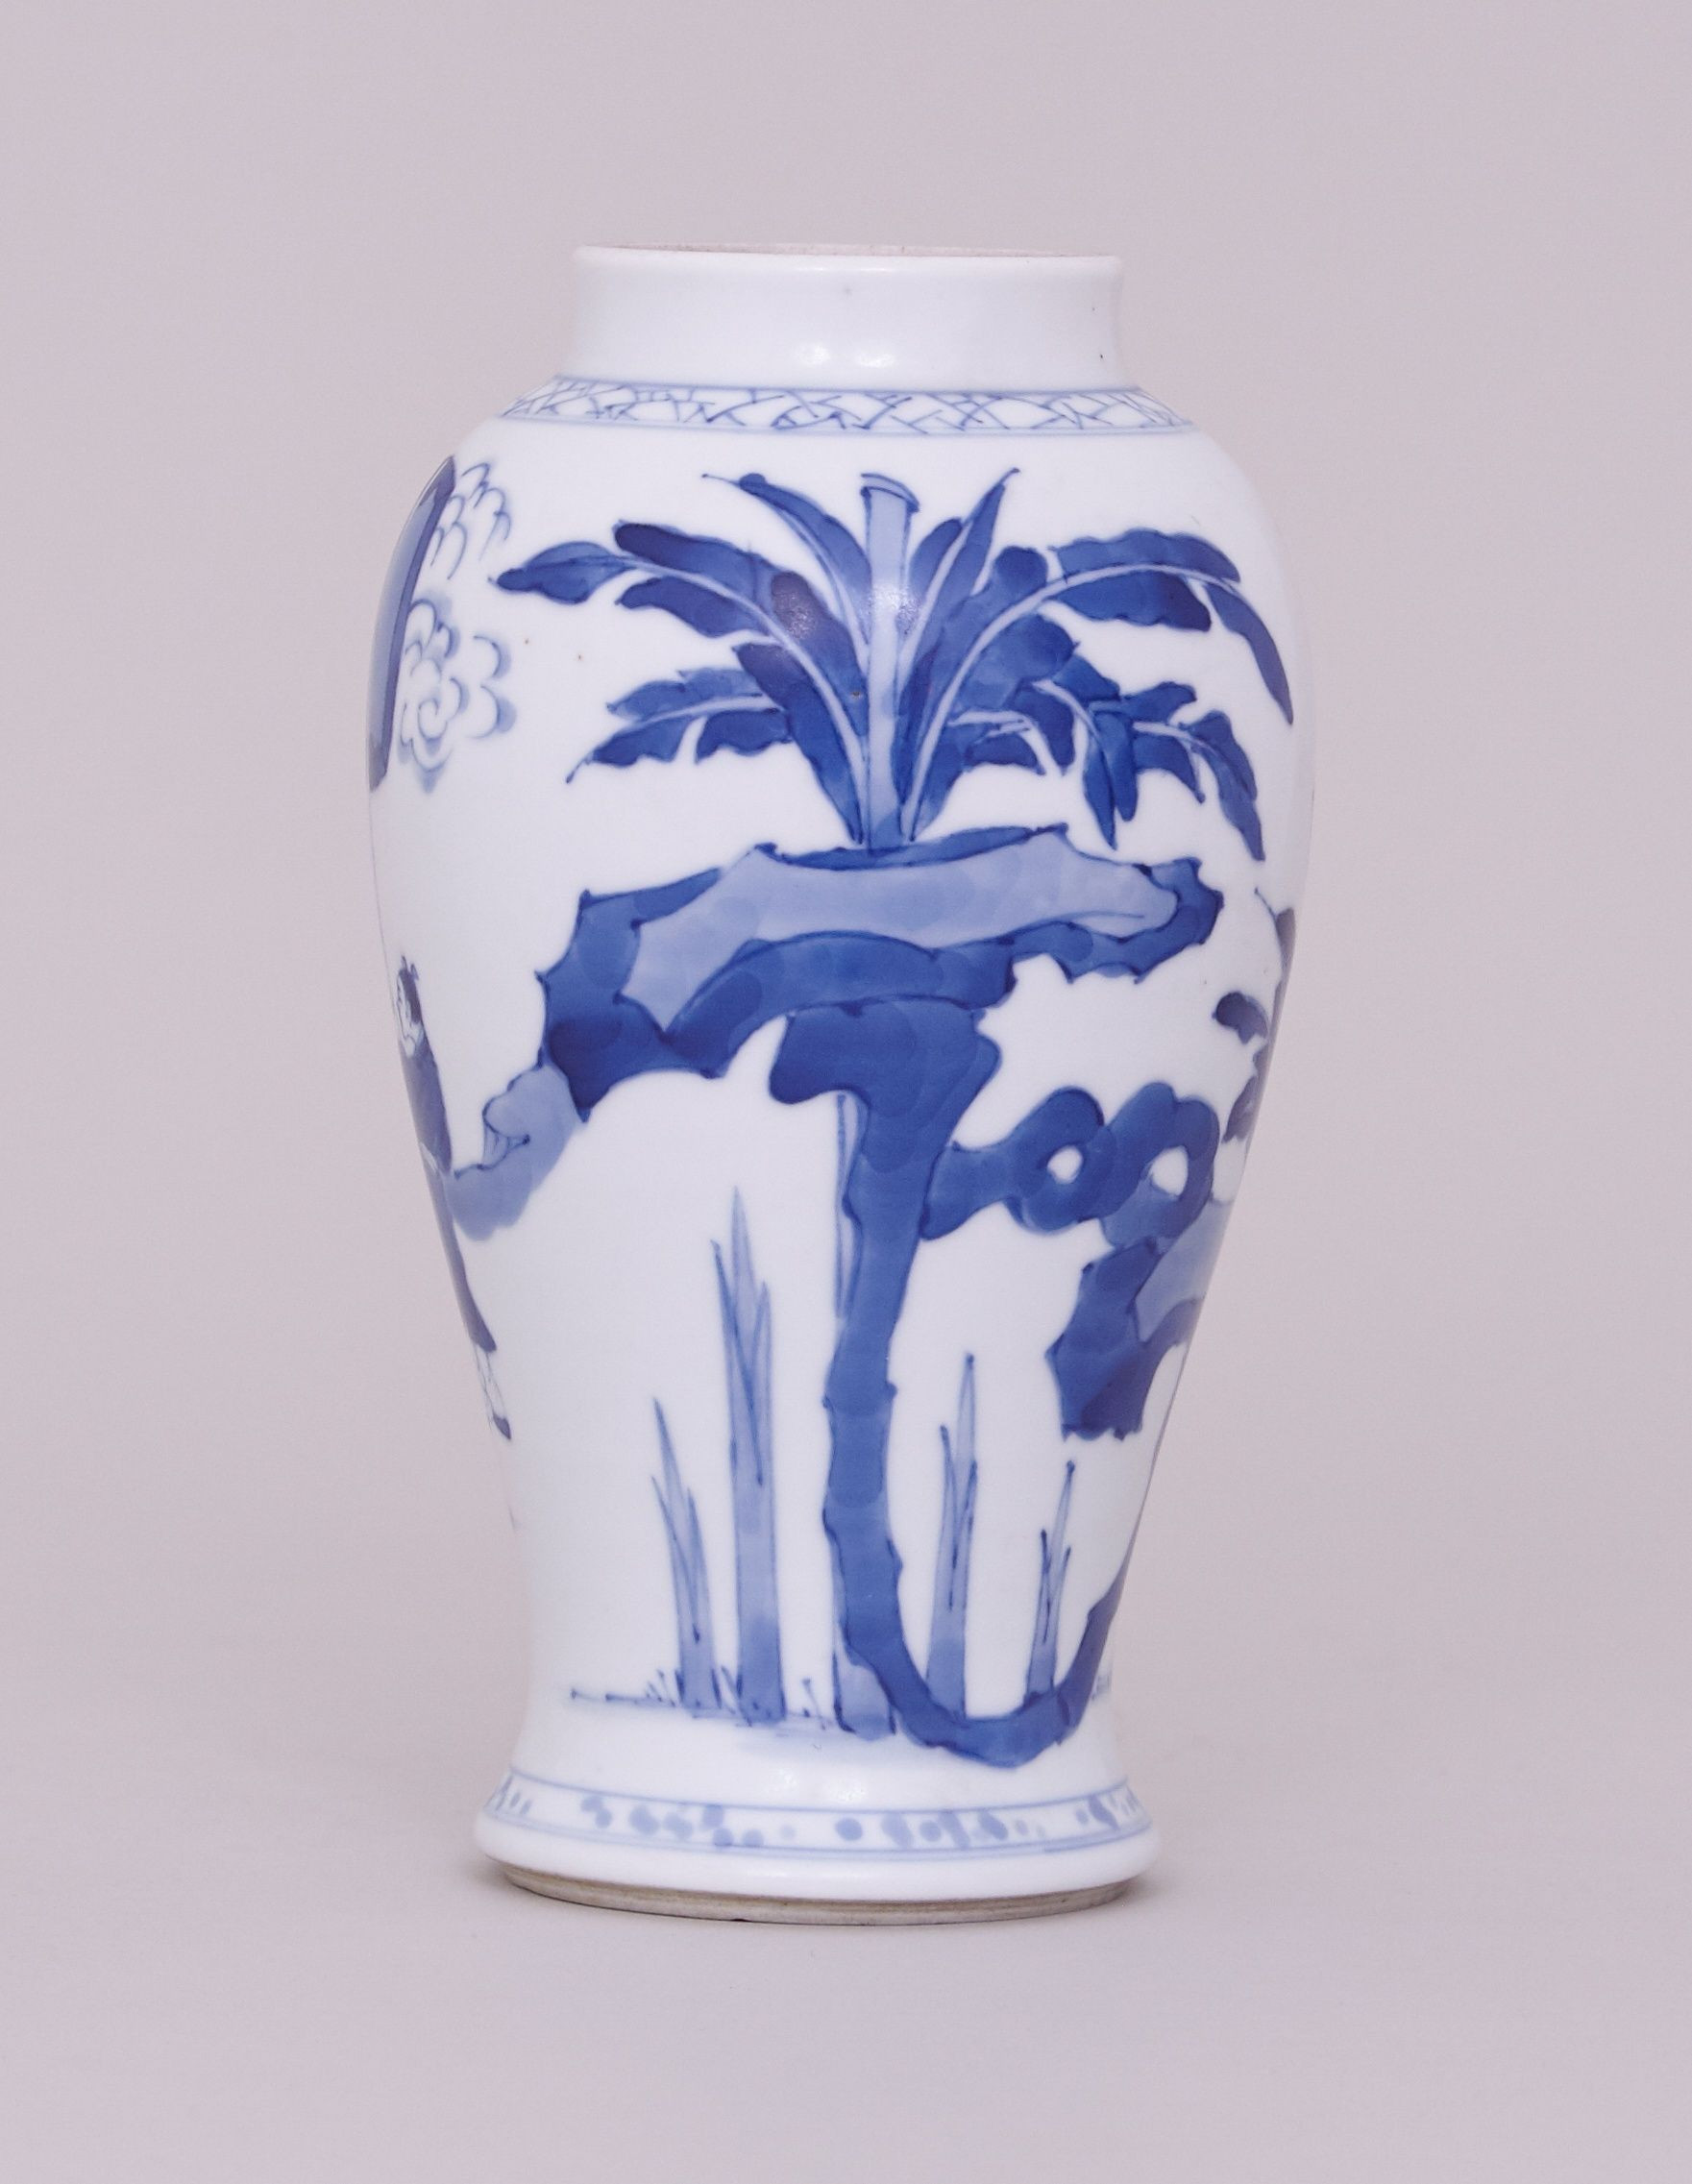 12 Spectacular Ming Dynasty Blue and White Vase 2024 free download ming dynasty blue and white vase of blue white vase lovely a chinese blue and white vase kangxi 1662 regarding blue white vase lovely a chinese blue and white vase kangxi 1662 1722